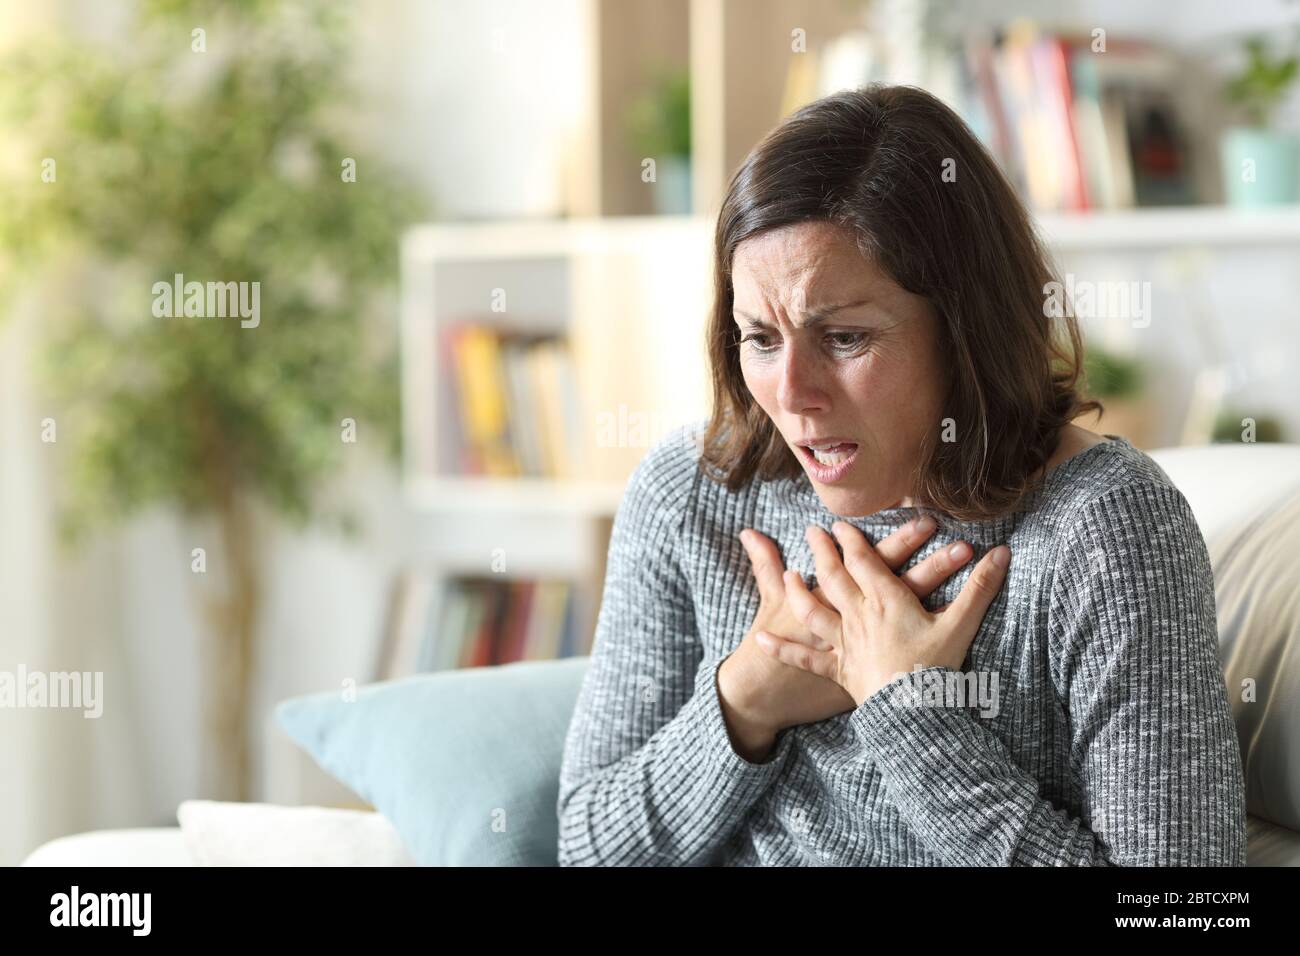 Middle age woman wheezing touching chest sitting on a couch at home Stock Photo